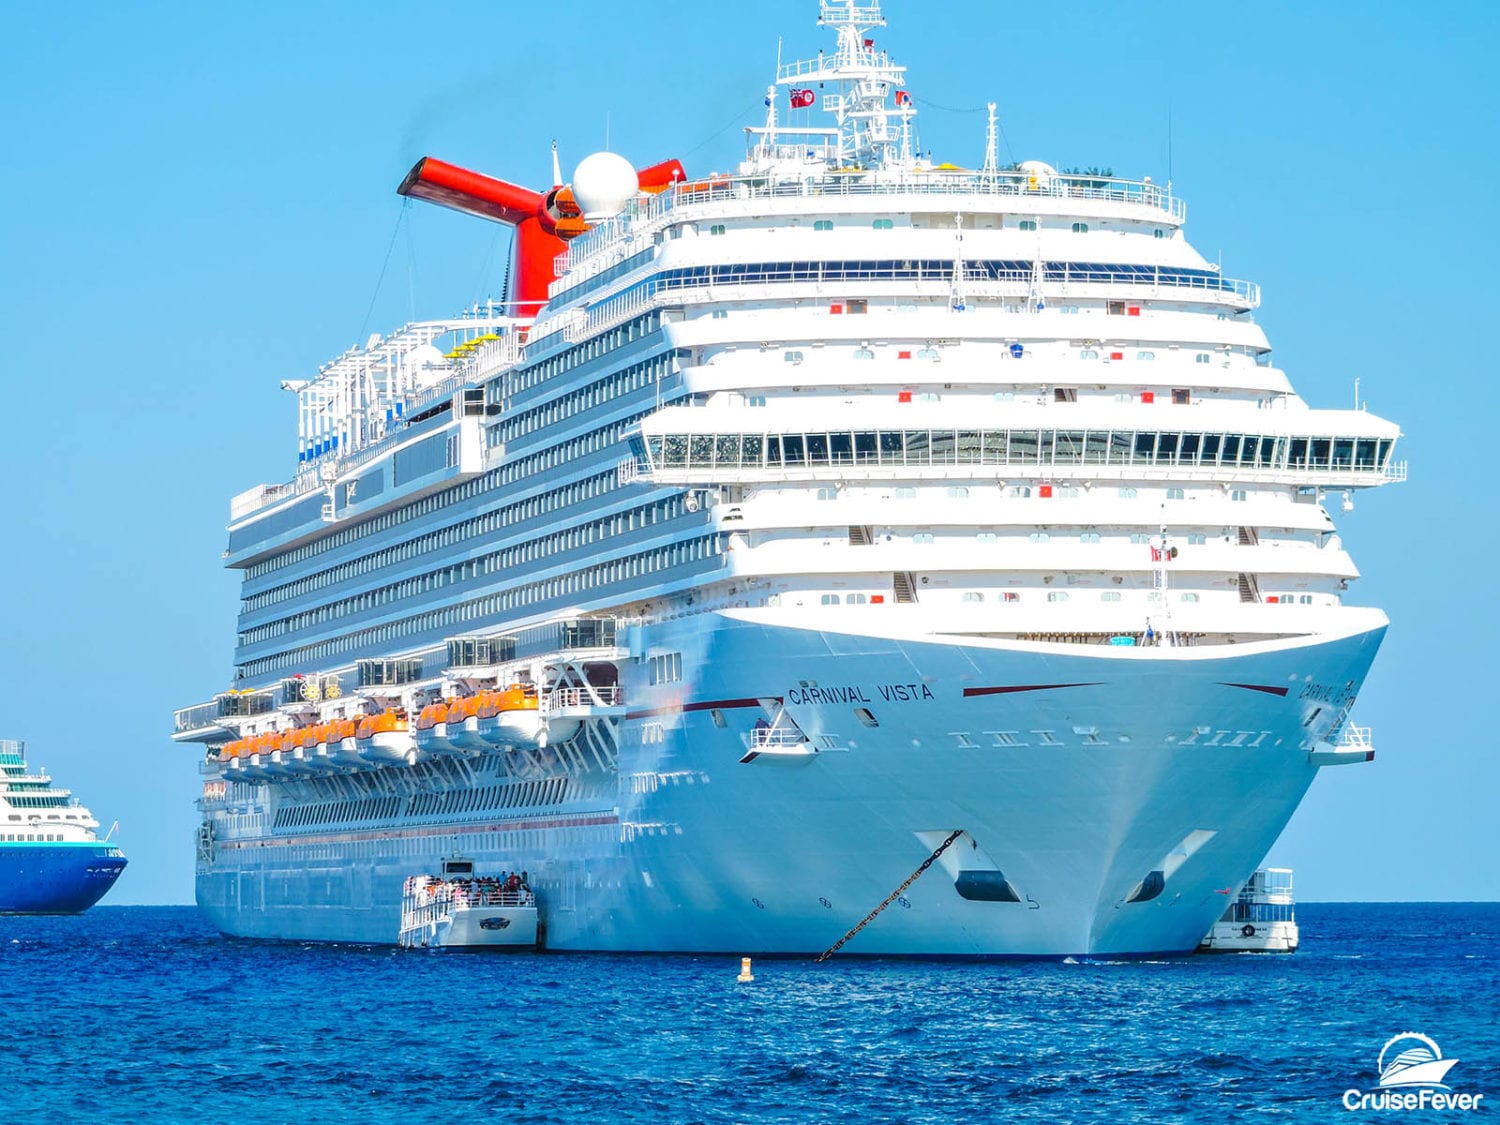 carnival-cruise-line-brings-back-their-popular-48-hour-sale-on-cruises